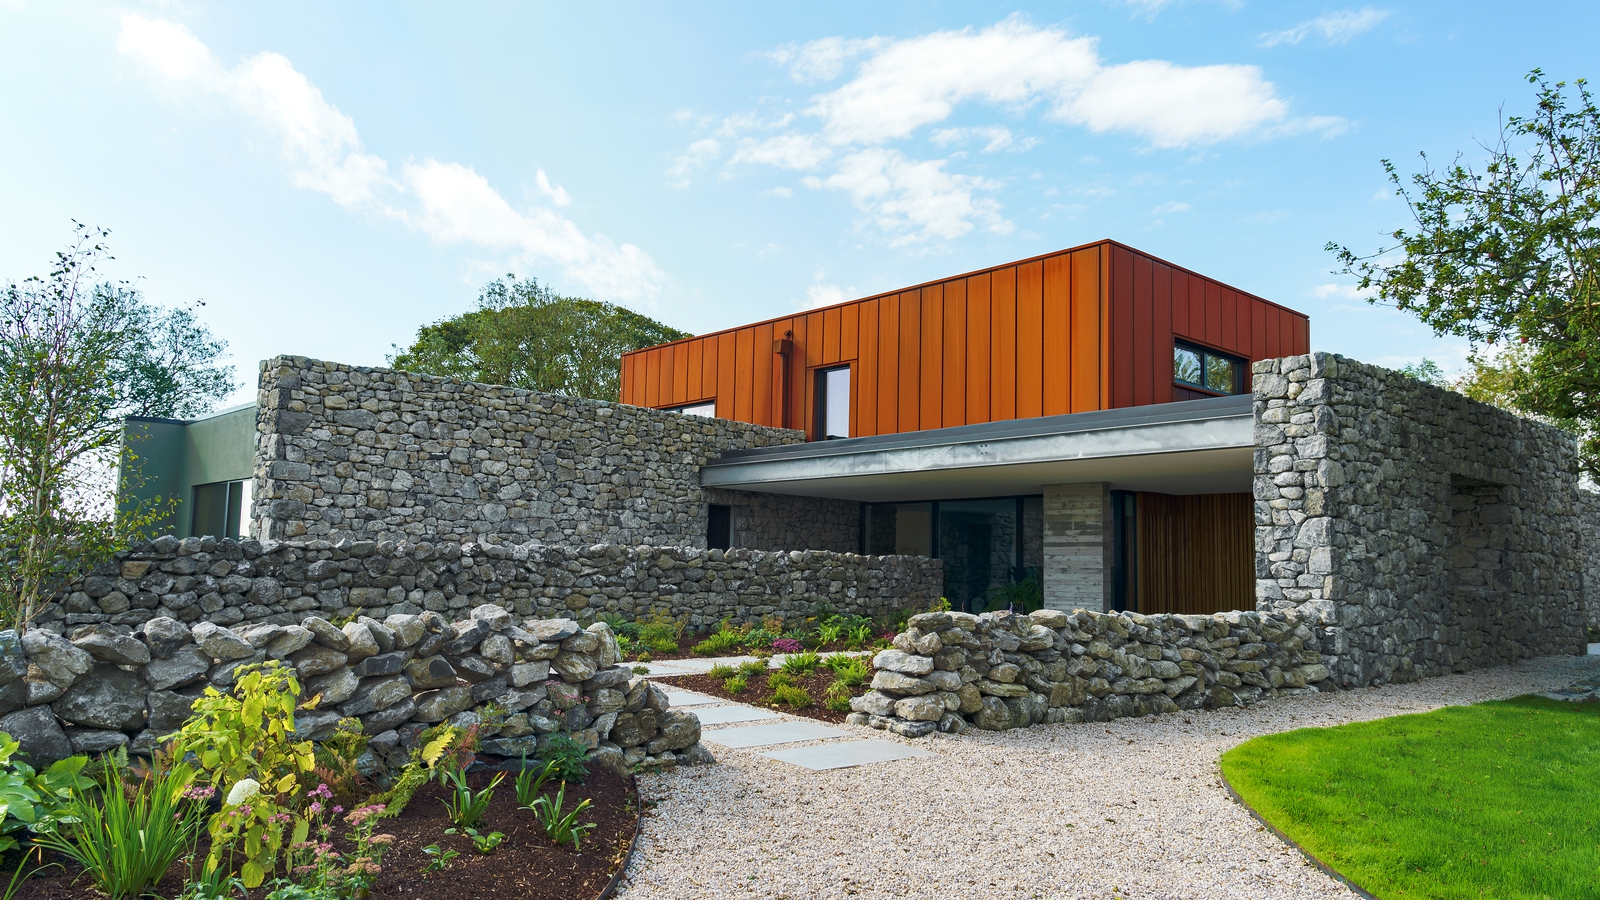 Home of the Year finalist named 'Ireland's favourite building'